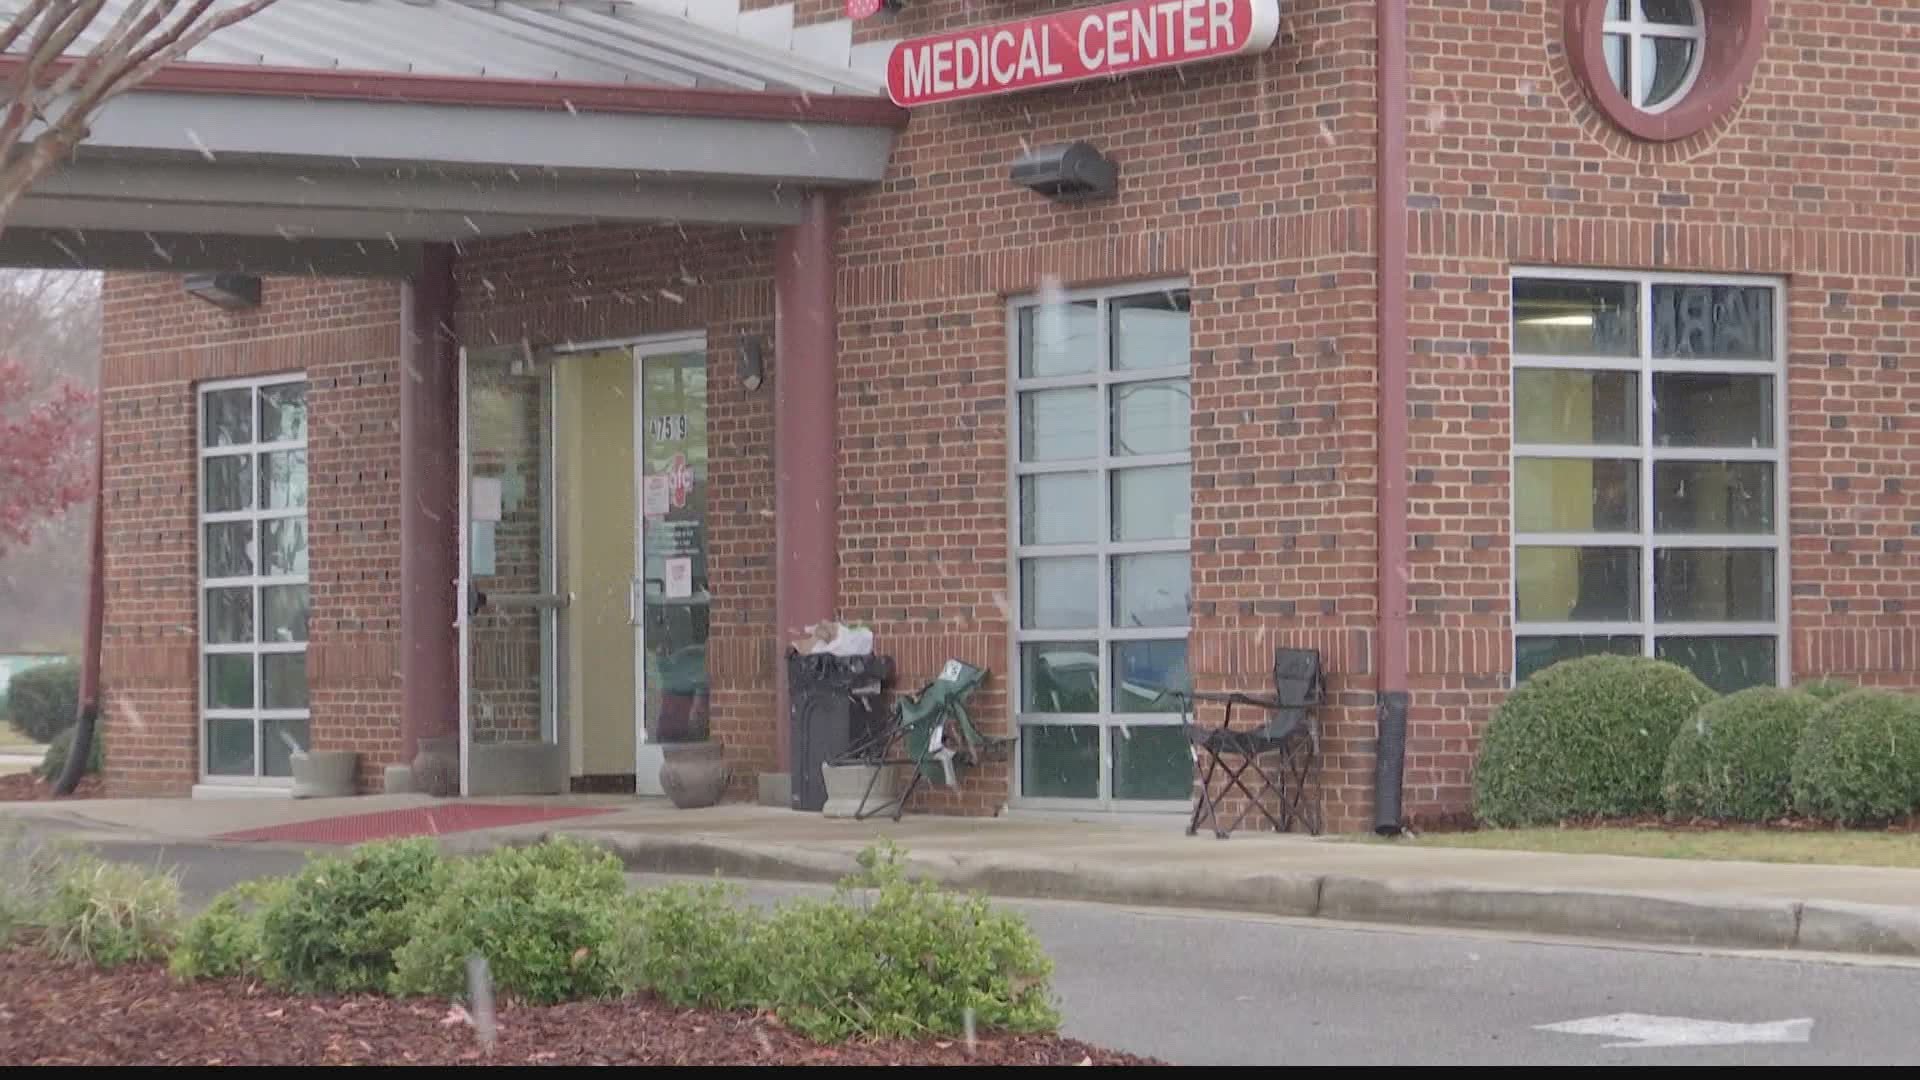 Workers at AFC Urgent Care say they were swamped the day after Thanksgiving. On Friday, they saw around 160 people who came for a COVID-19 test.